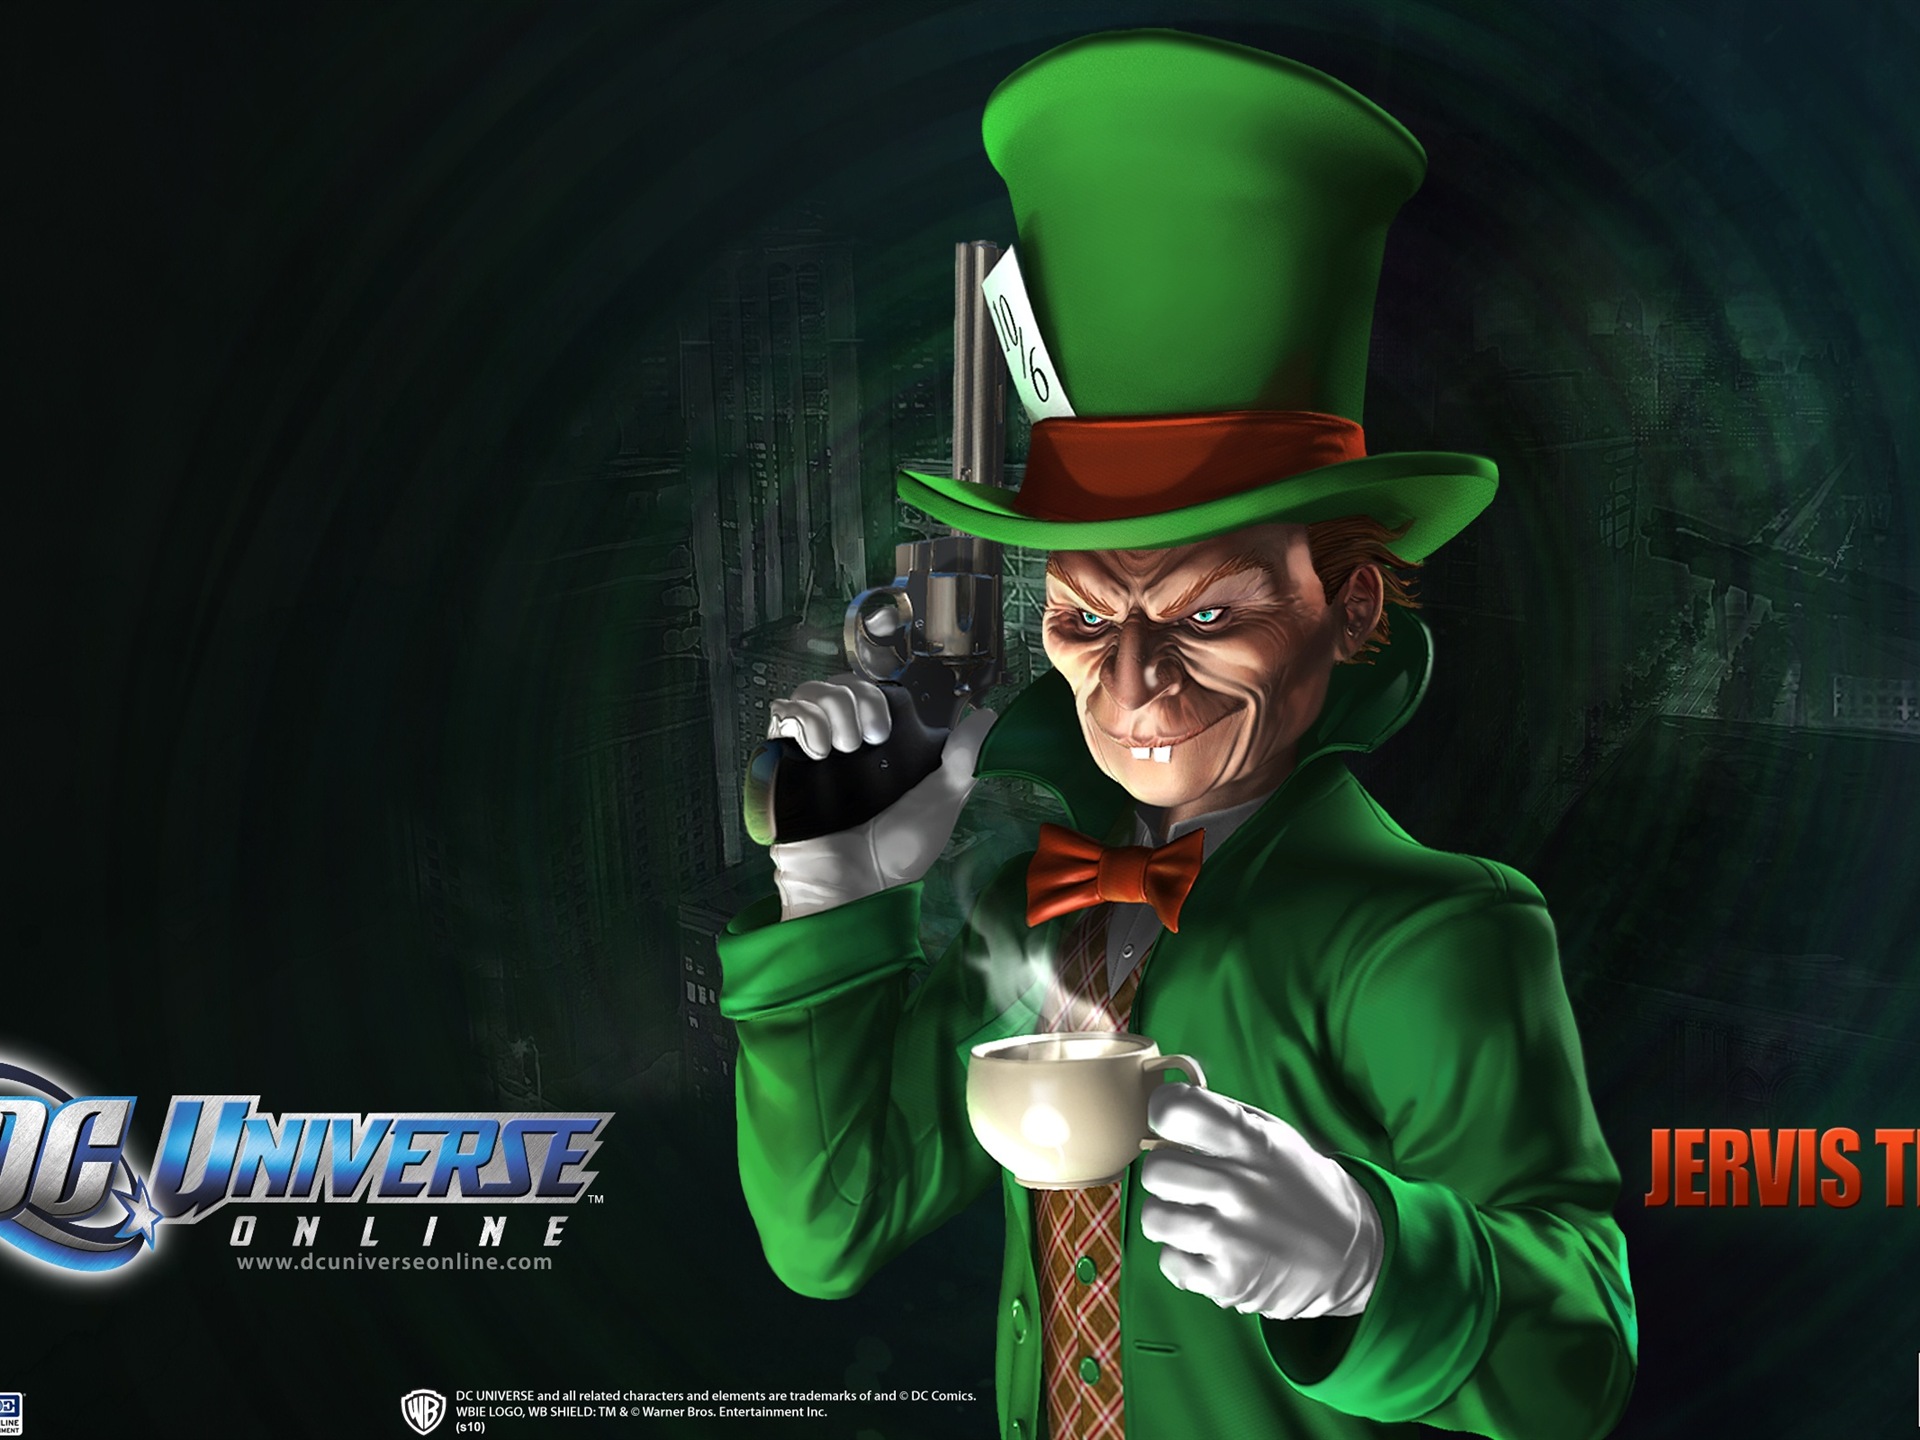 DC Universe Online HD game wallpapers #21 - 1920x1440